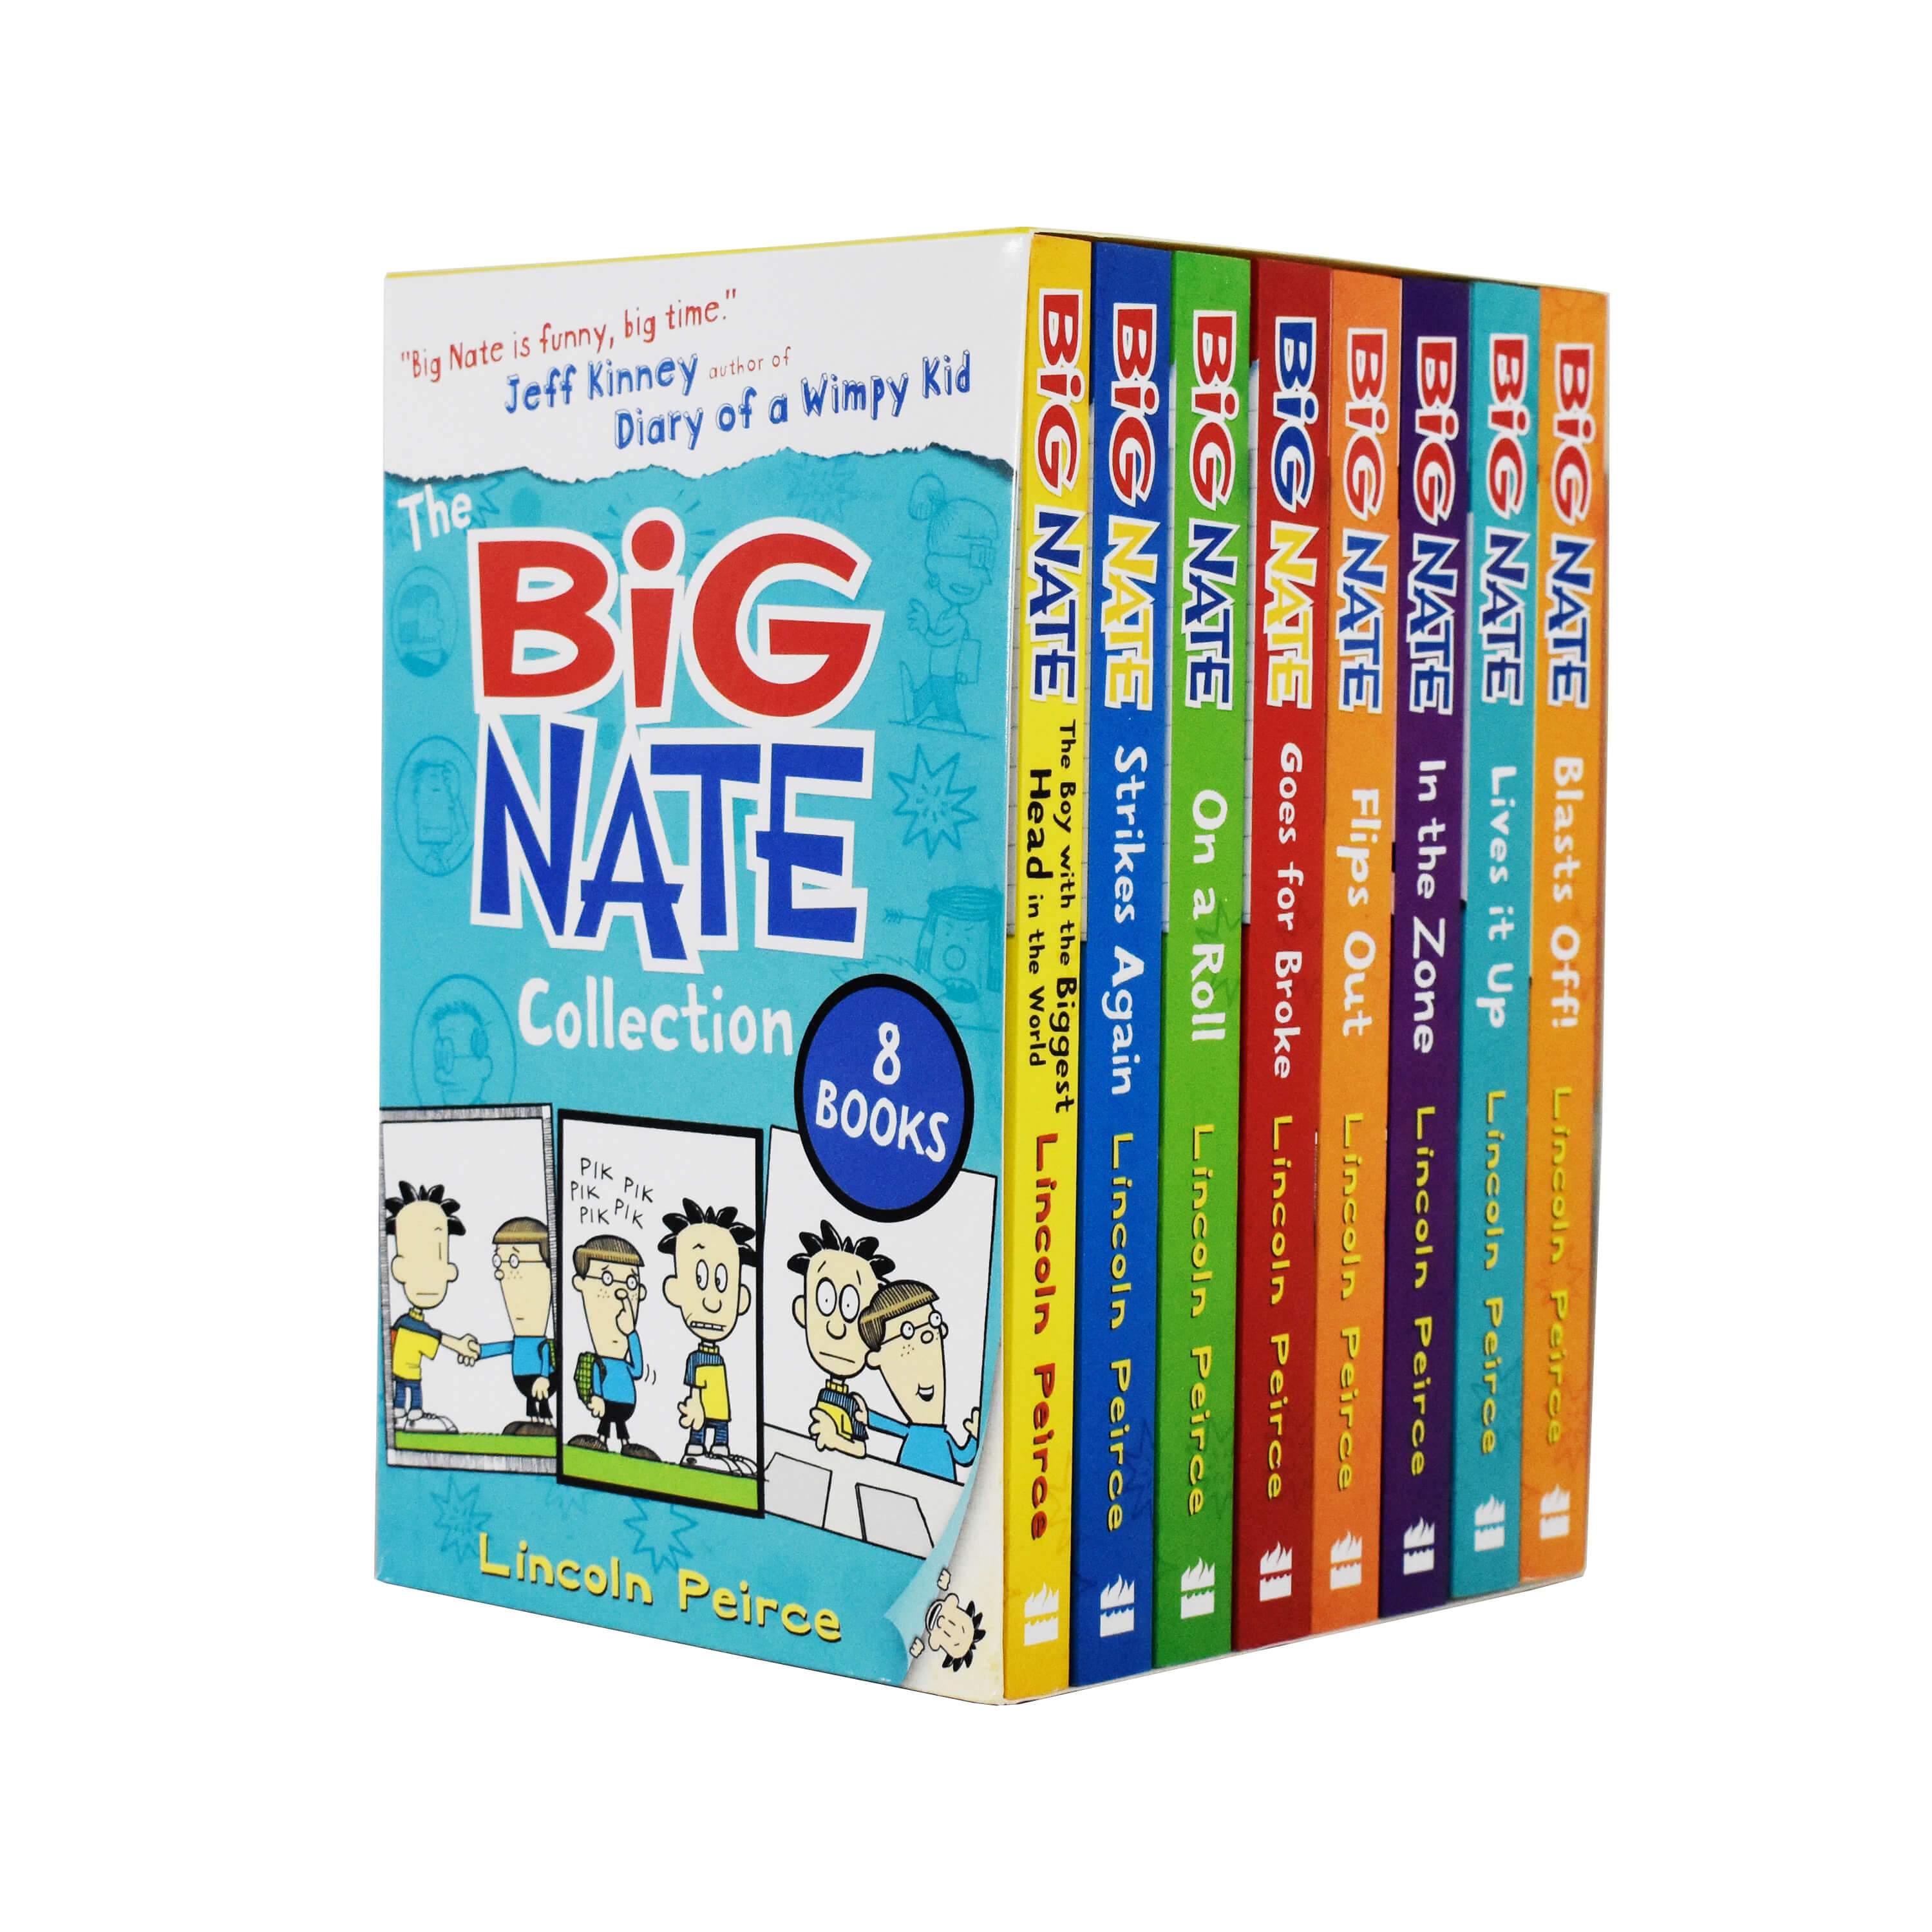 Age 9-14 - The Big Nate Collection Series 8 Books Box Set By Lincoln Peirce - Ages 9-14 - Paperback